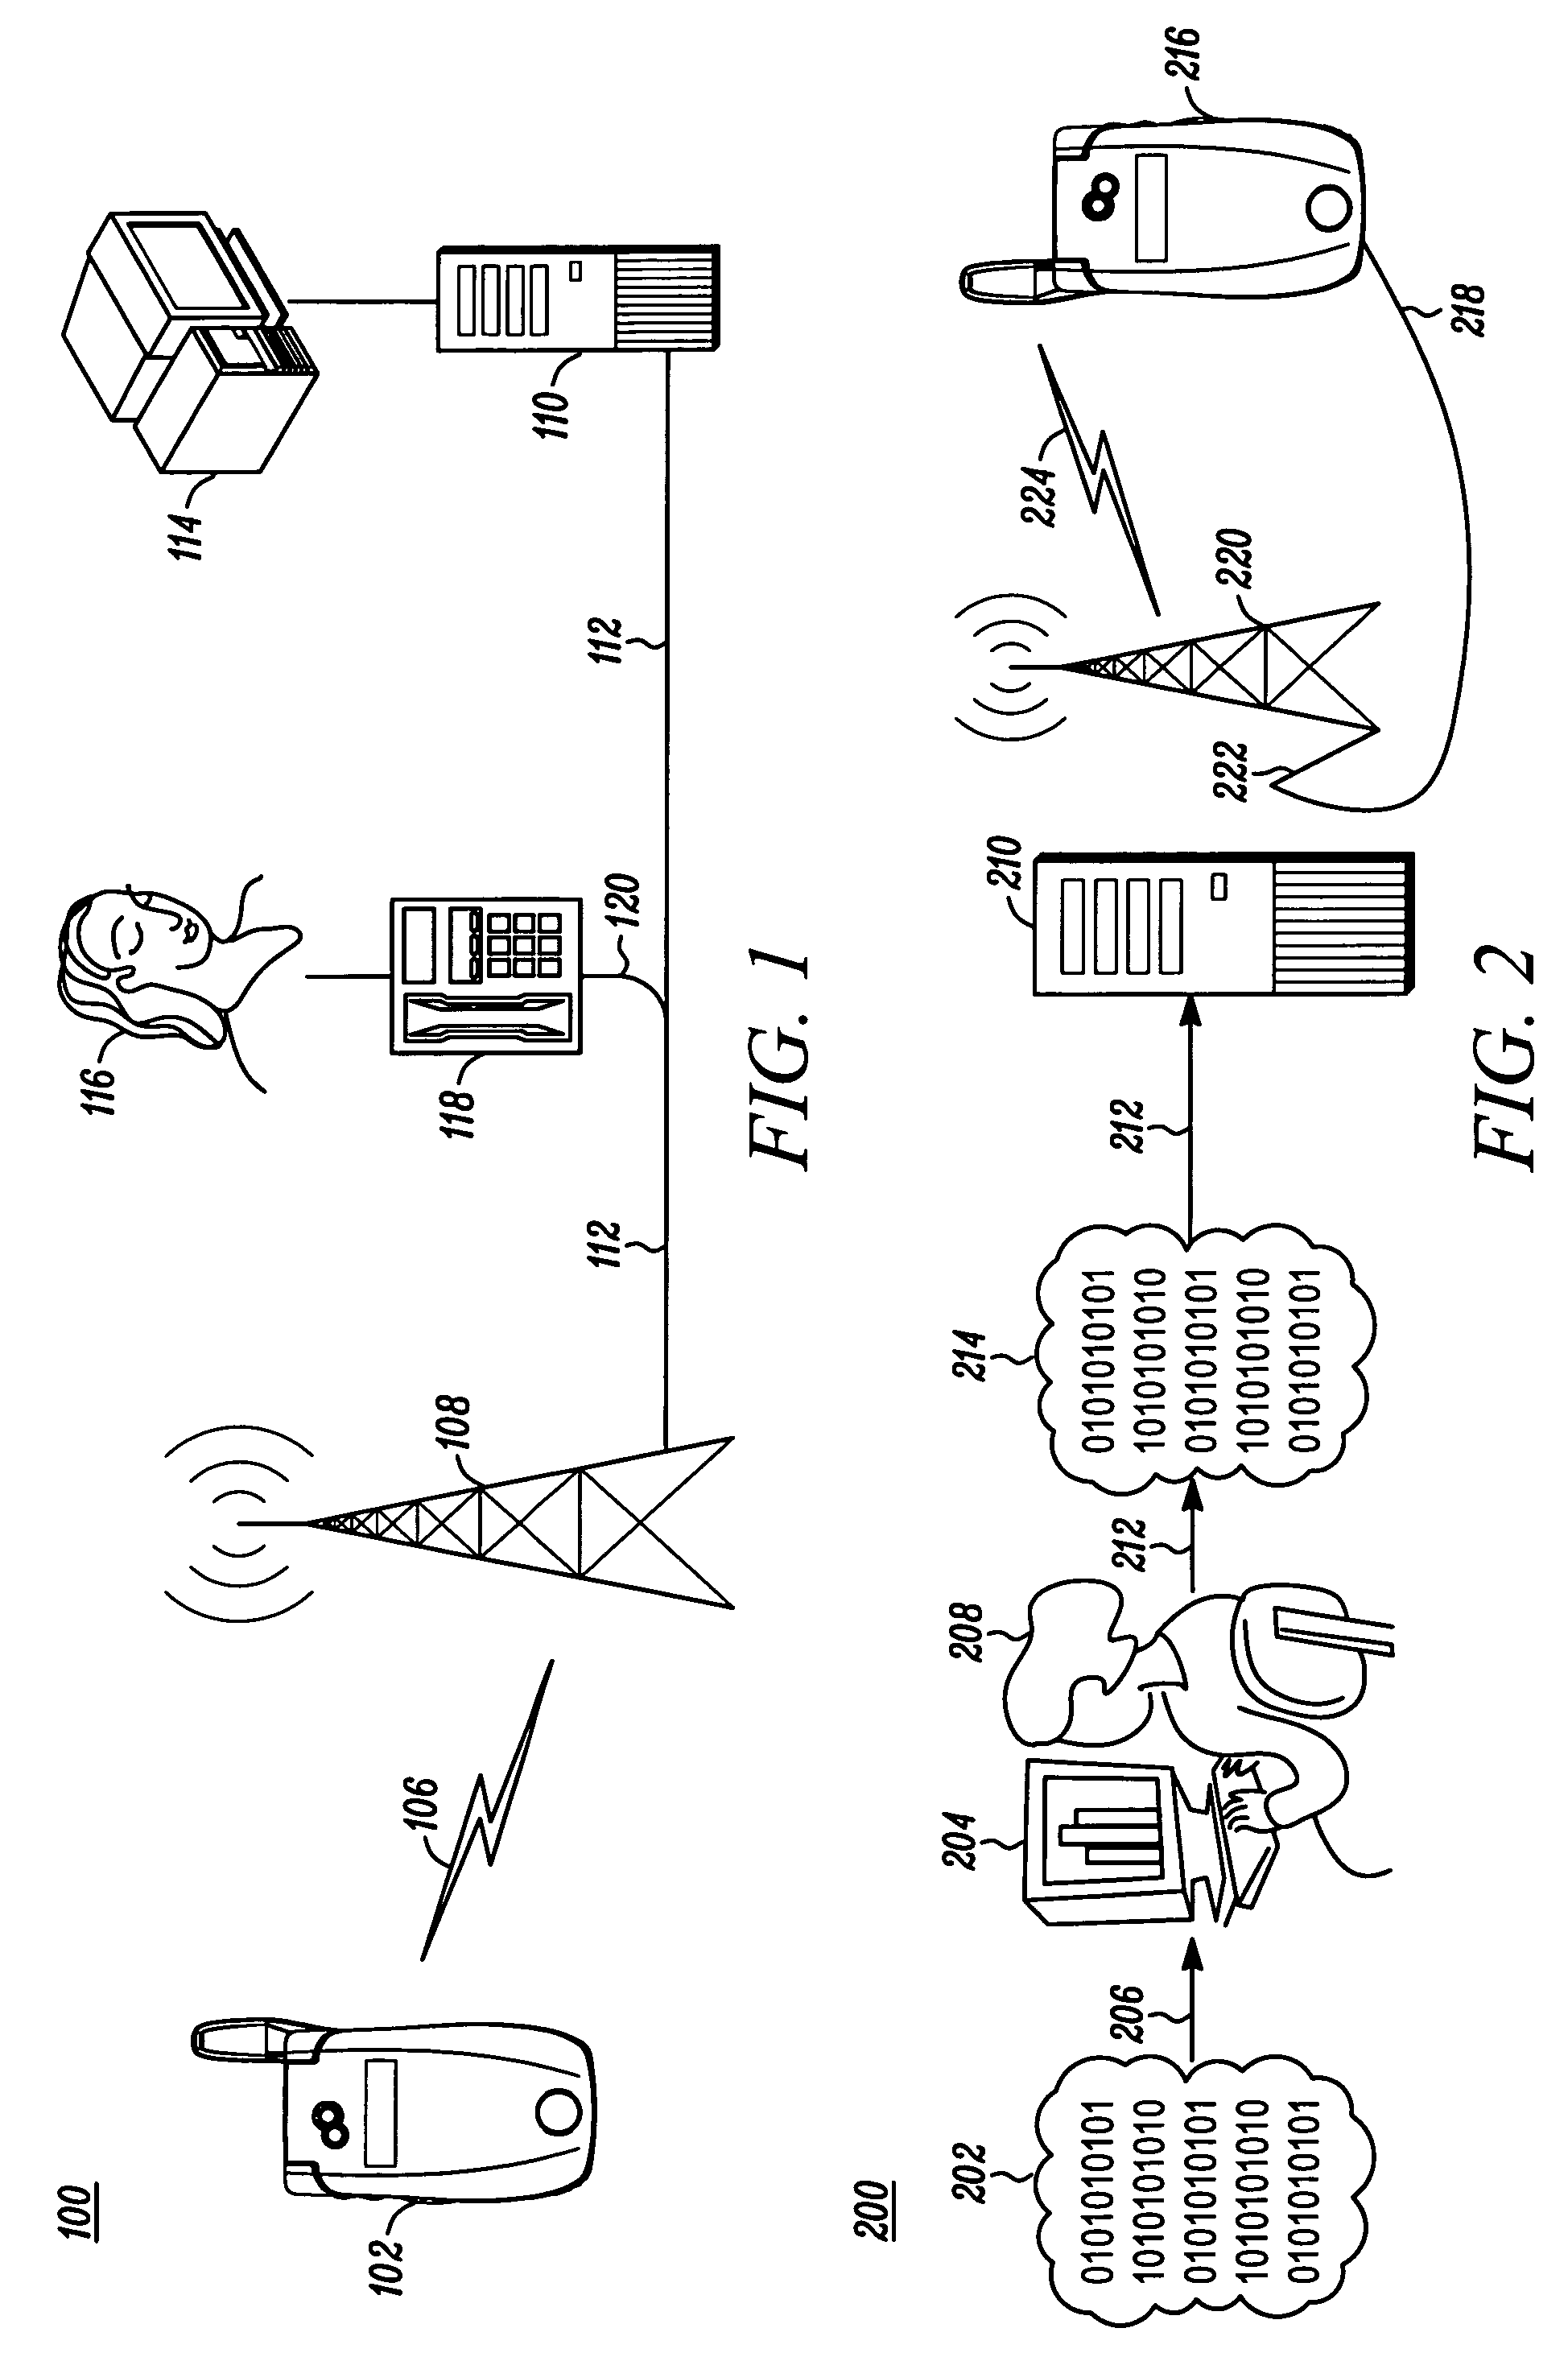 Method and apparatus for providing digital rights management